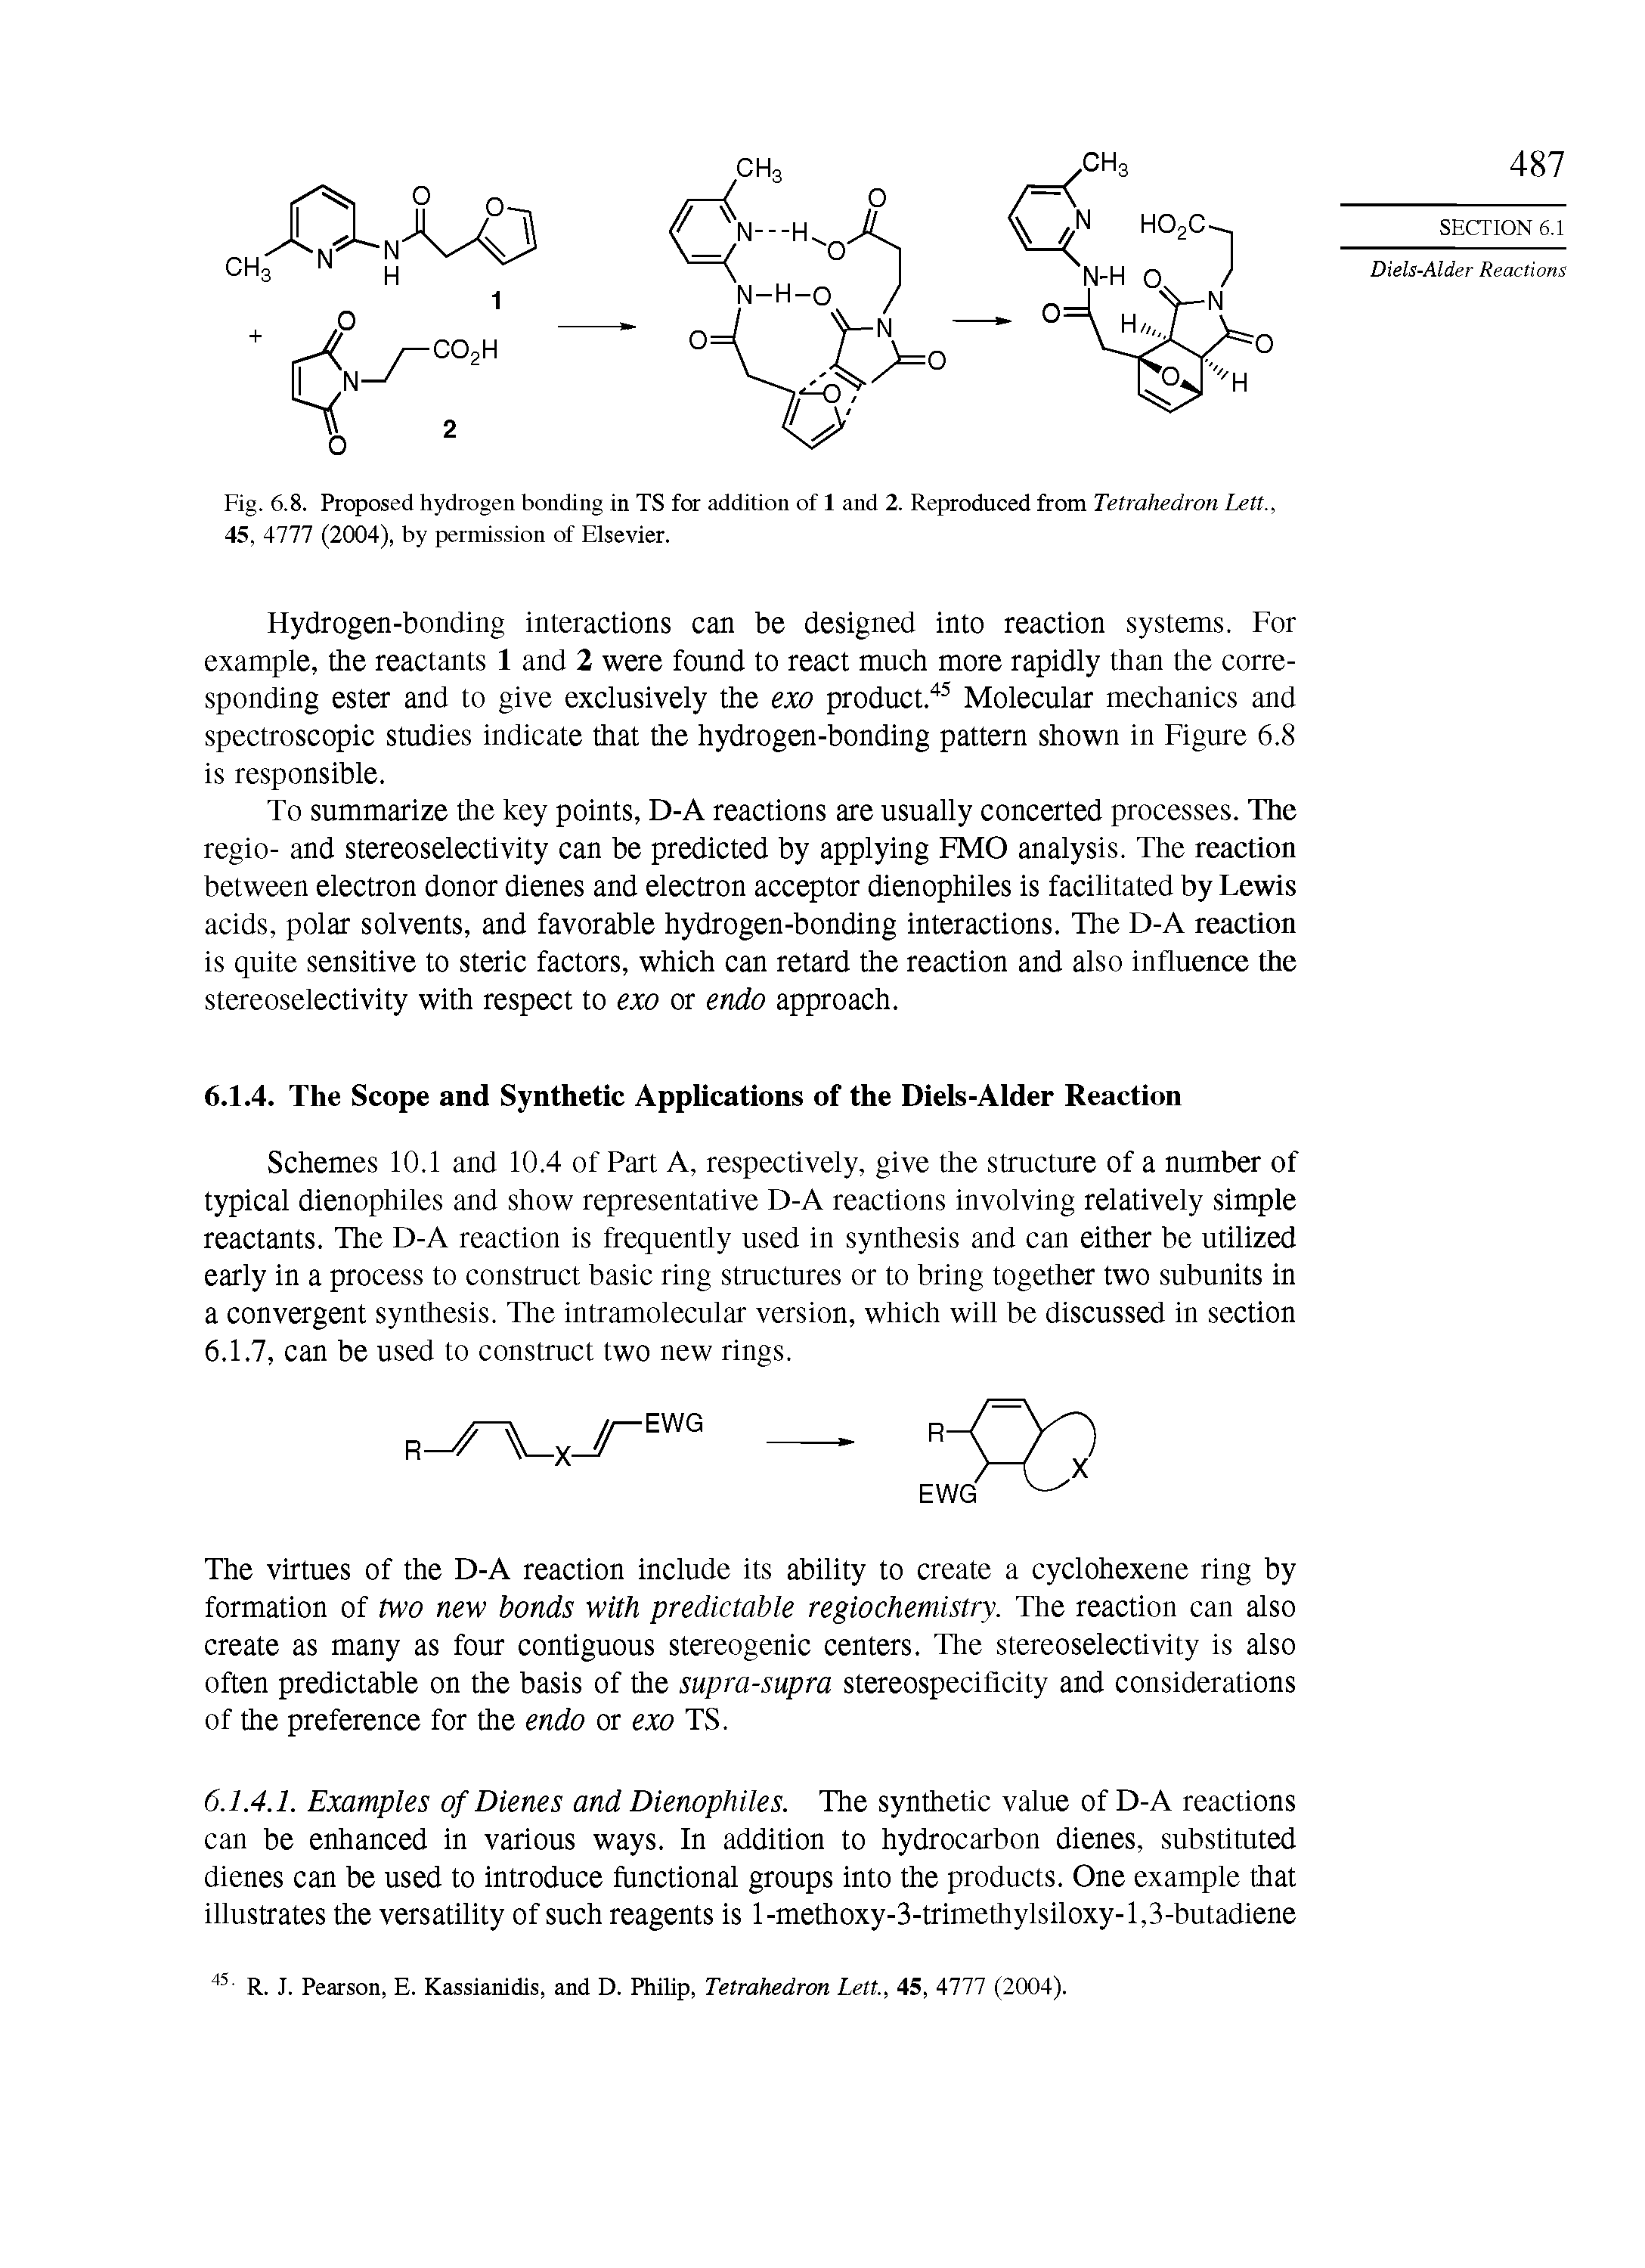 Schemes 10.1 and 10.4 of Part A, respectively, give the structure of a number of typical dienophiles and show representative D-A reactions involving relatively simple reactants. The D-A reaction is frequently used in synthesis and can either be utilized early in a process to construct basic ring structures or to bring together two subunits in a convergent synthesis. The intramolecular version, which will be discussed in section 6.1.7, can be used to construct two new rings.